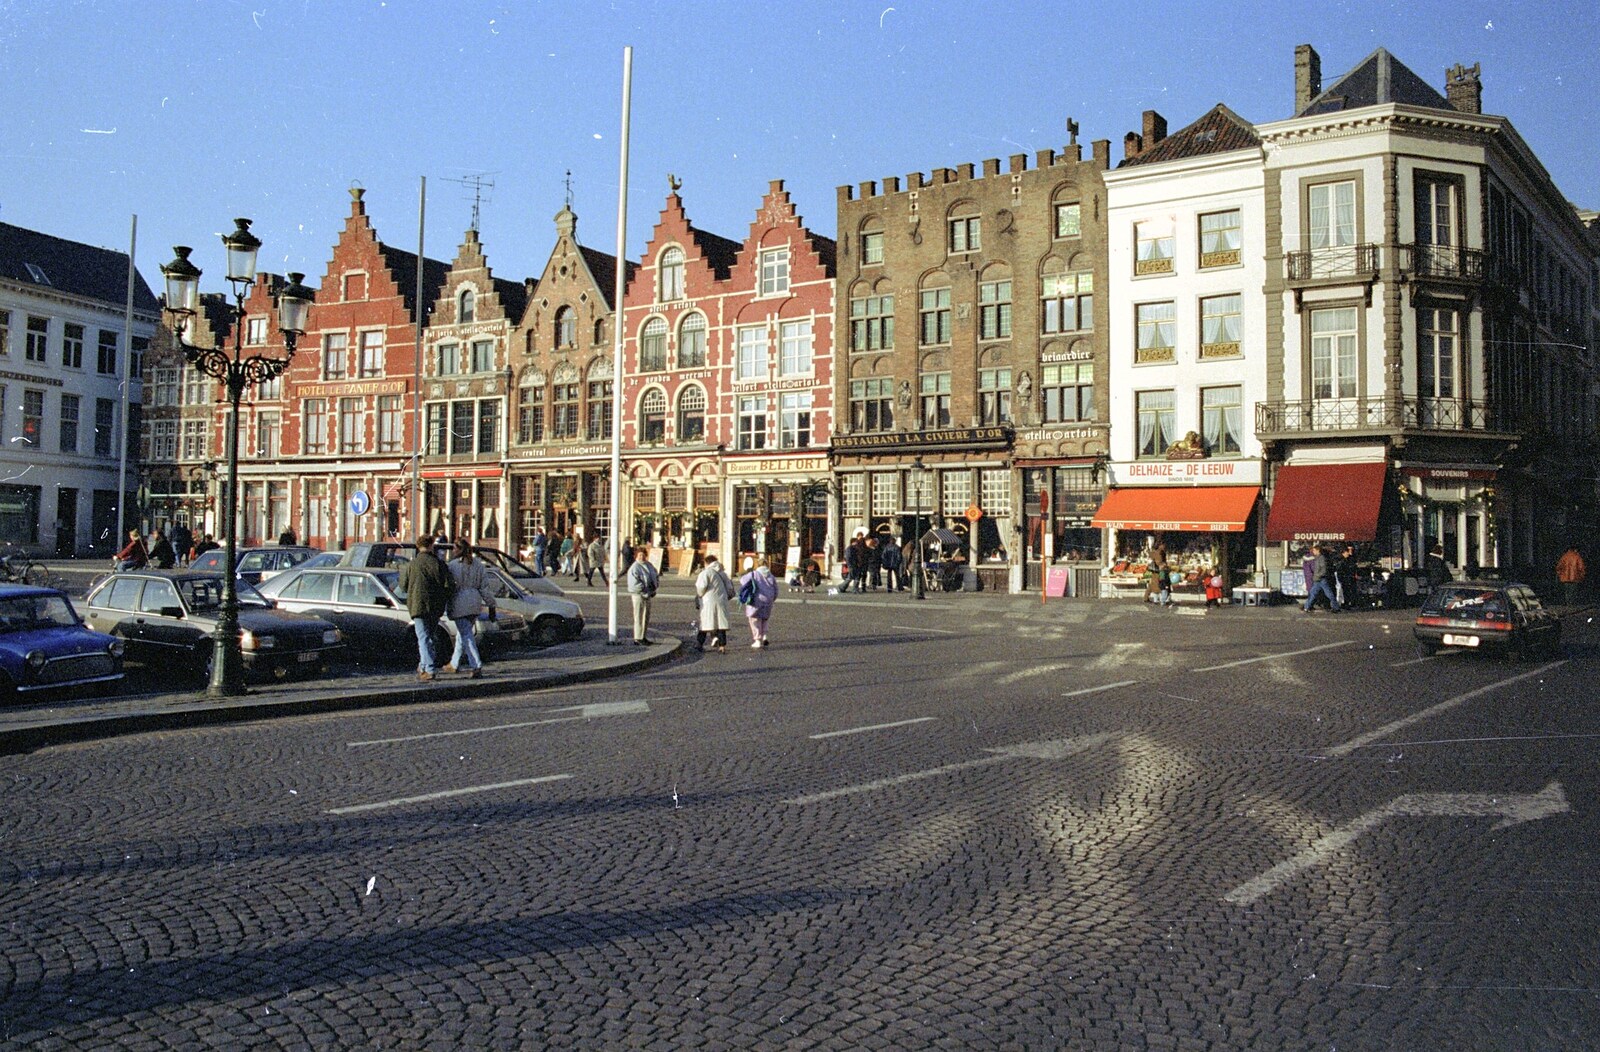 The Clays posse crosses the road from Clays Does Bruges, Belgium - 19th December 1992